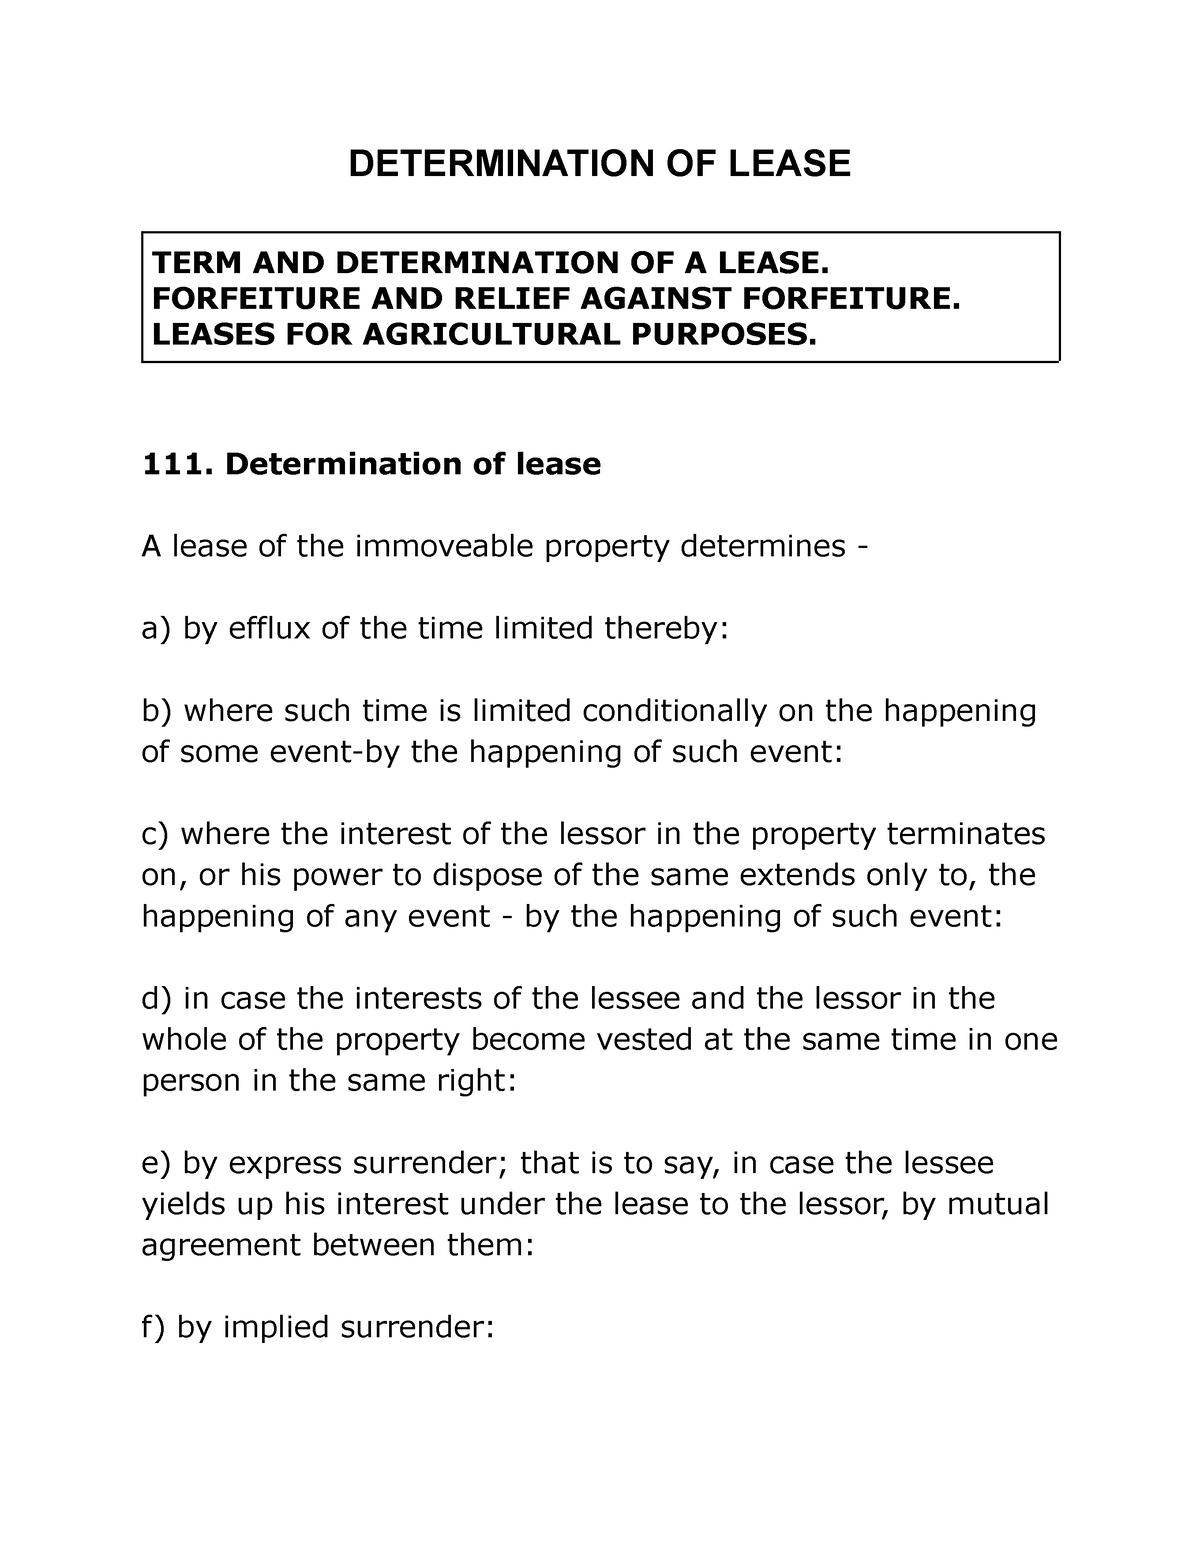 assignment of lease land registry fee